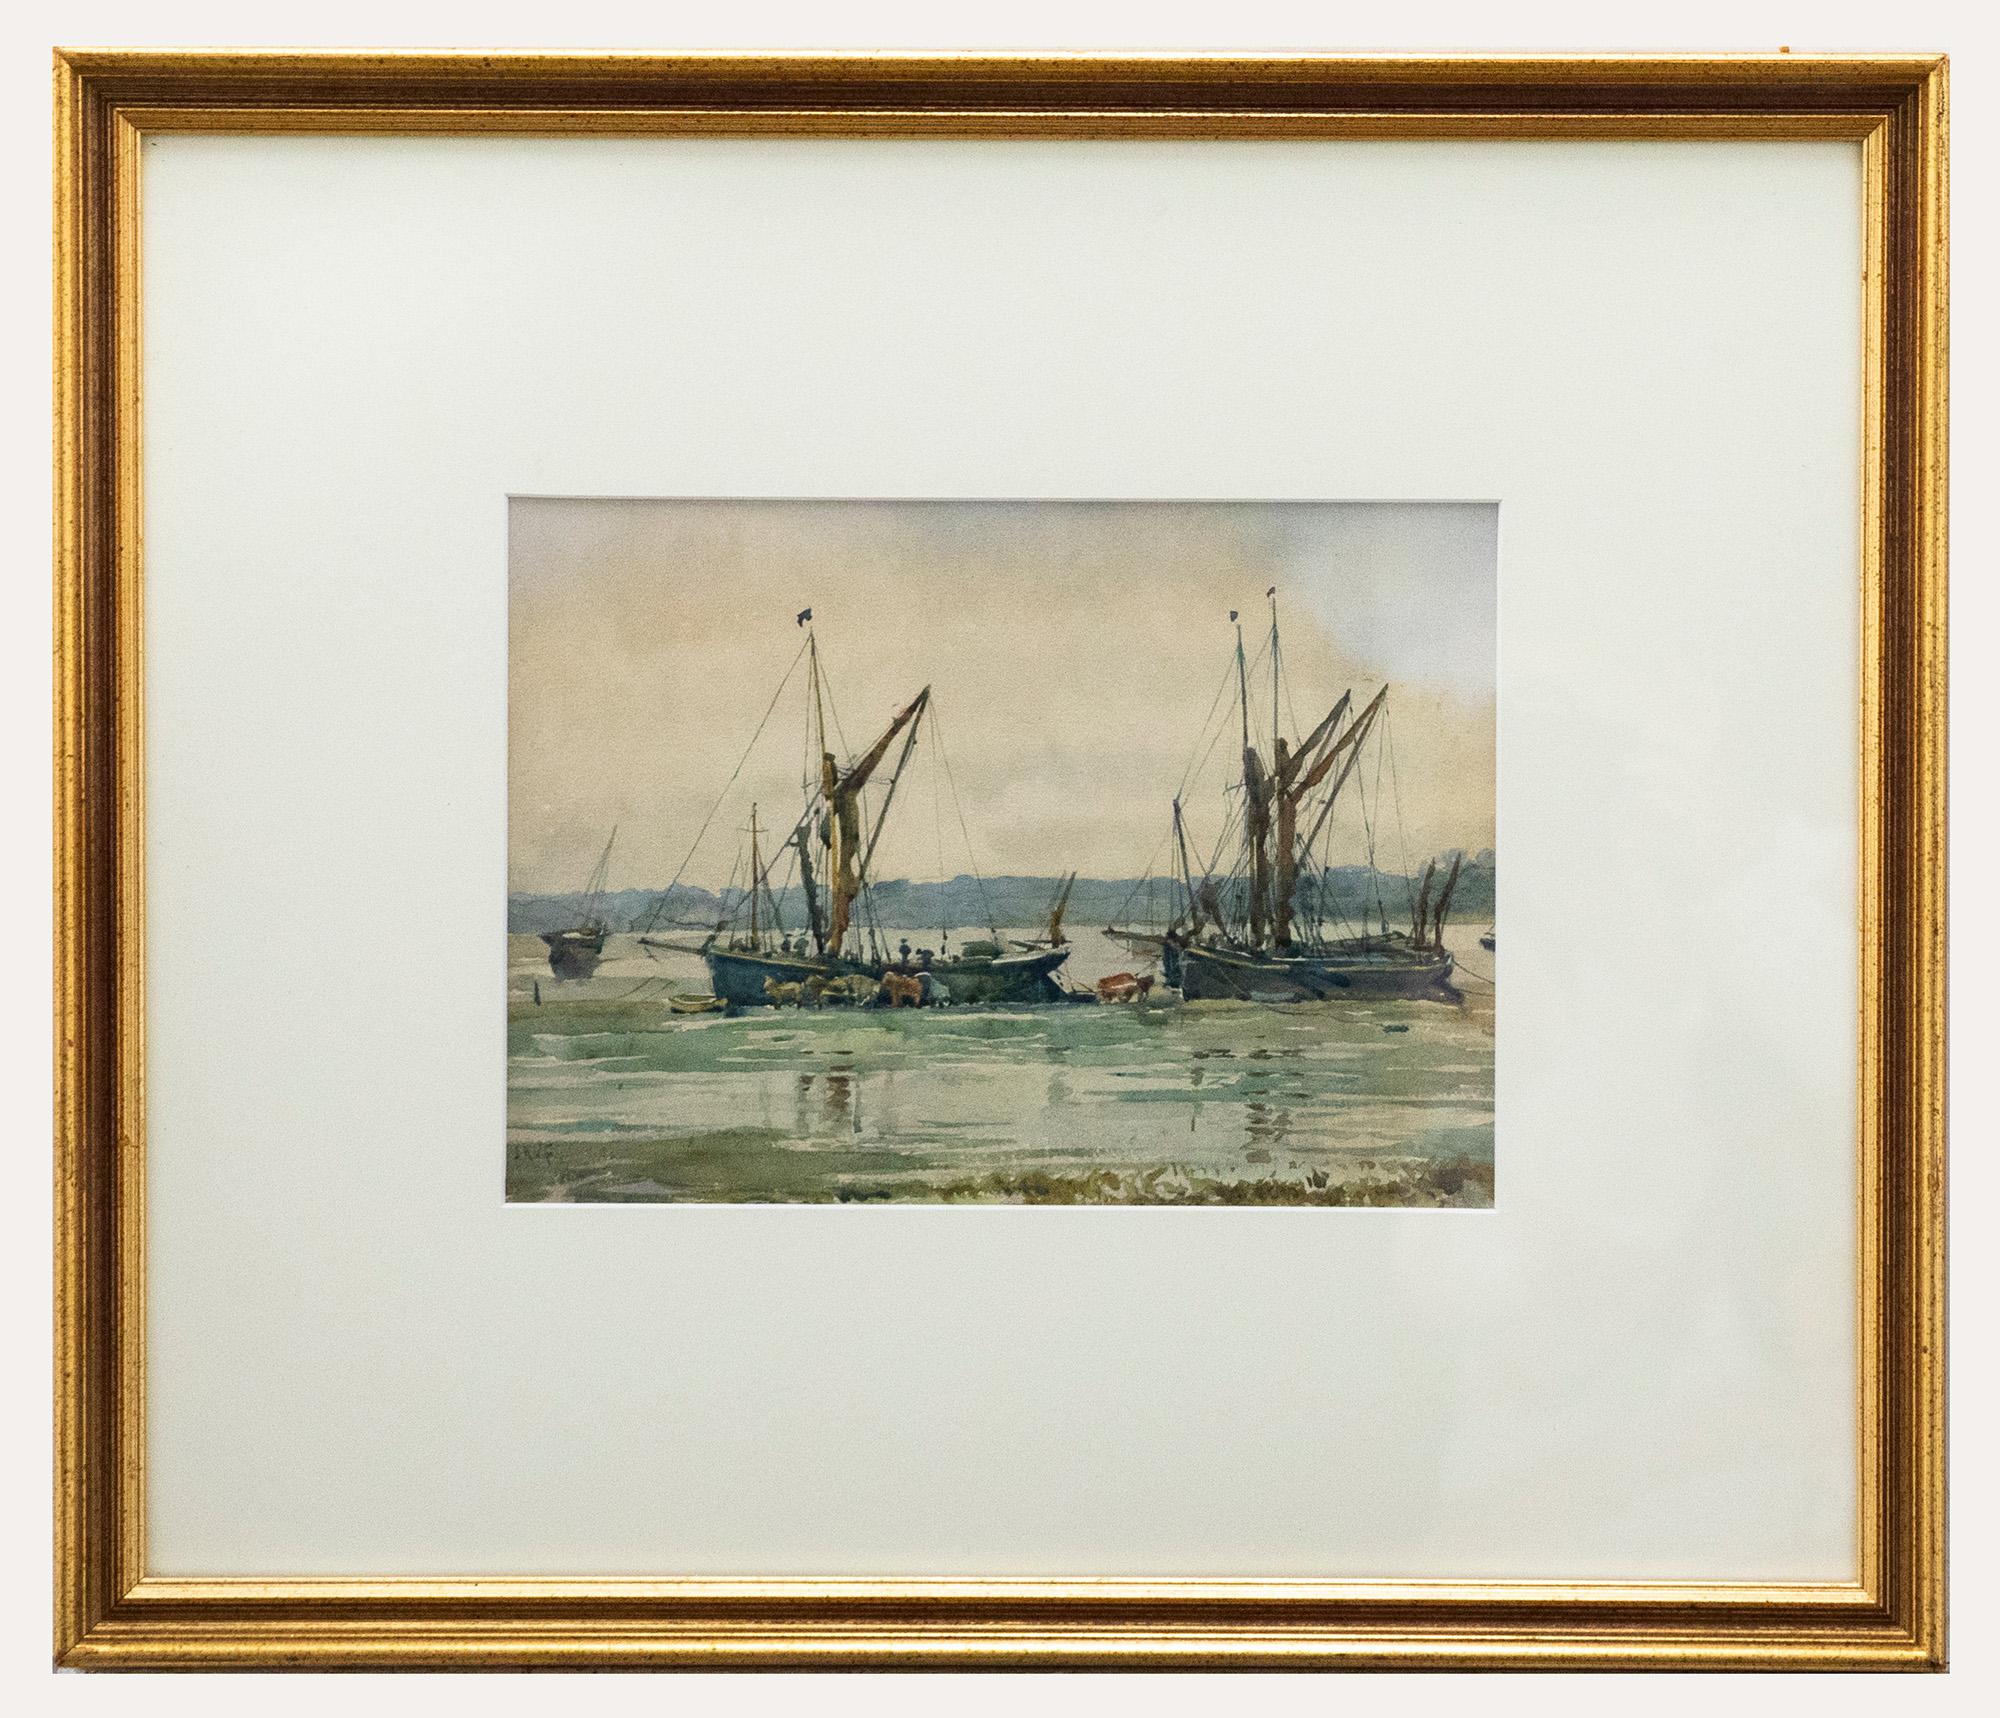 Unknown Landscape Art - Joseph Henry Vignoles Fisher (1862-1945) - Framed Watercolour, On the Orwell